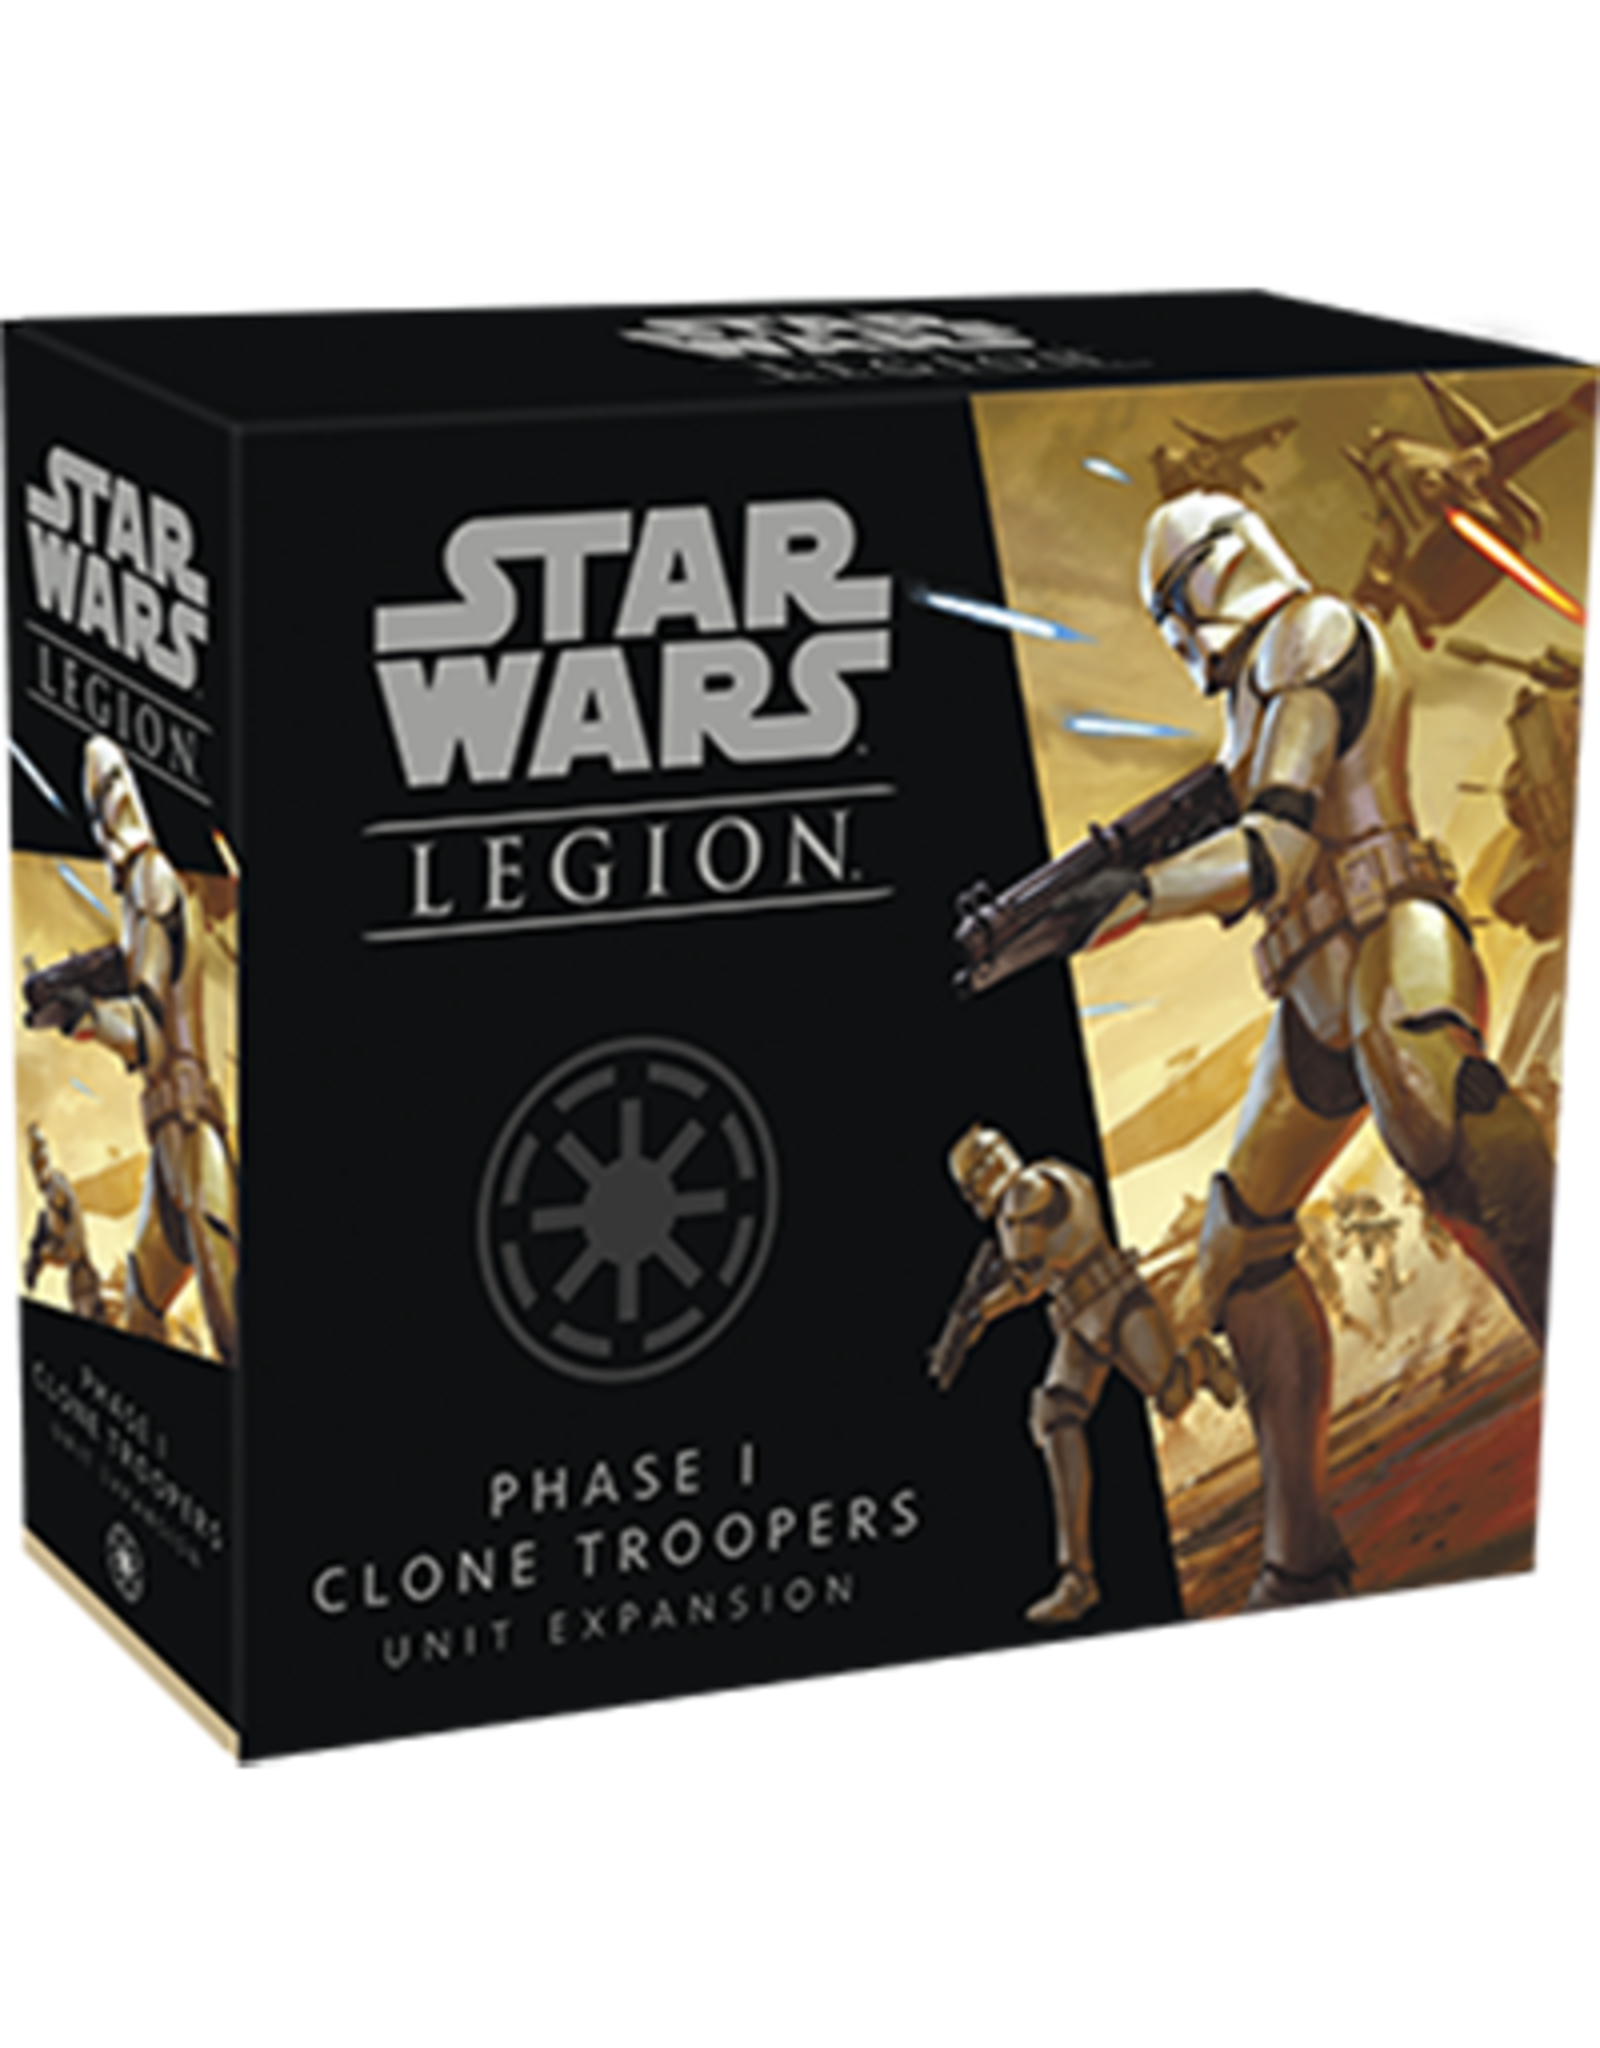 Atomic Mass Games Star Wars Legion - Phase I Clone Troopers